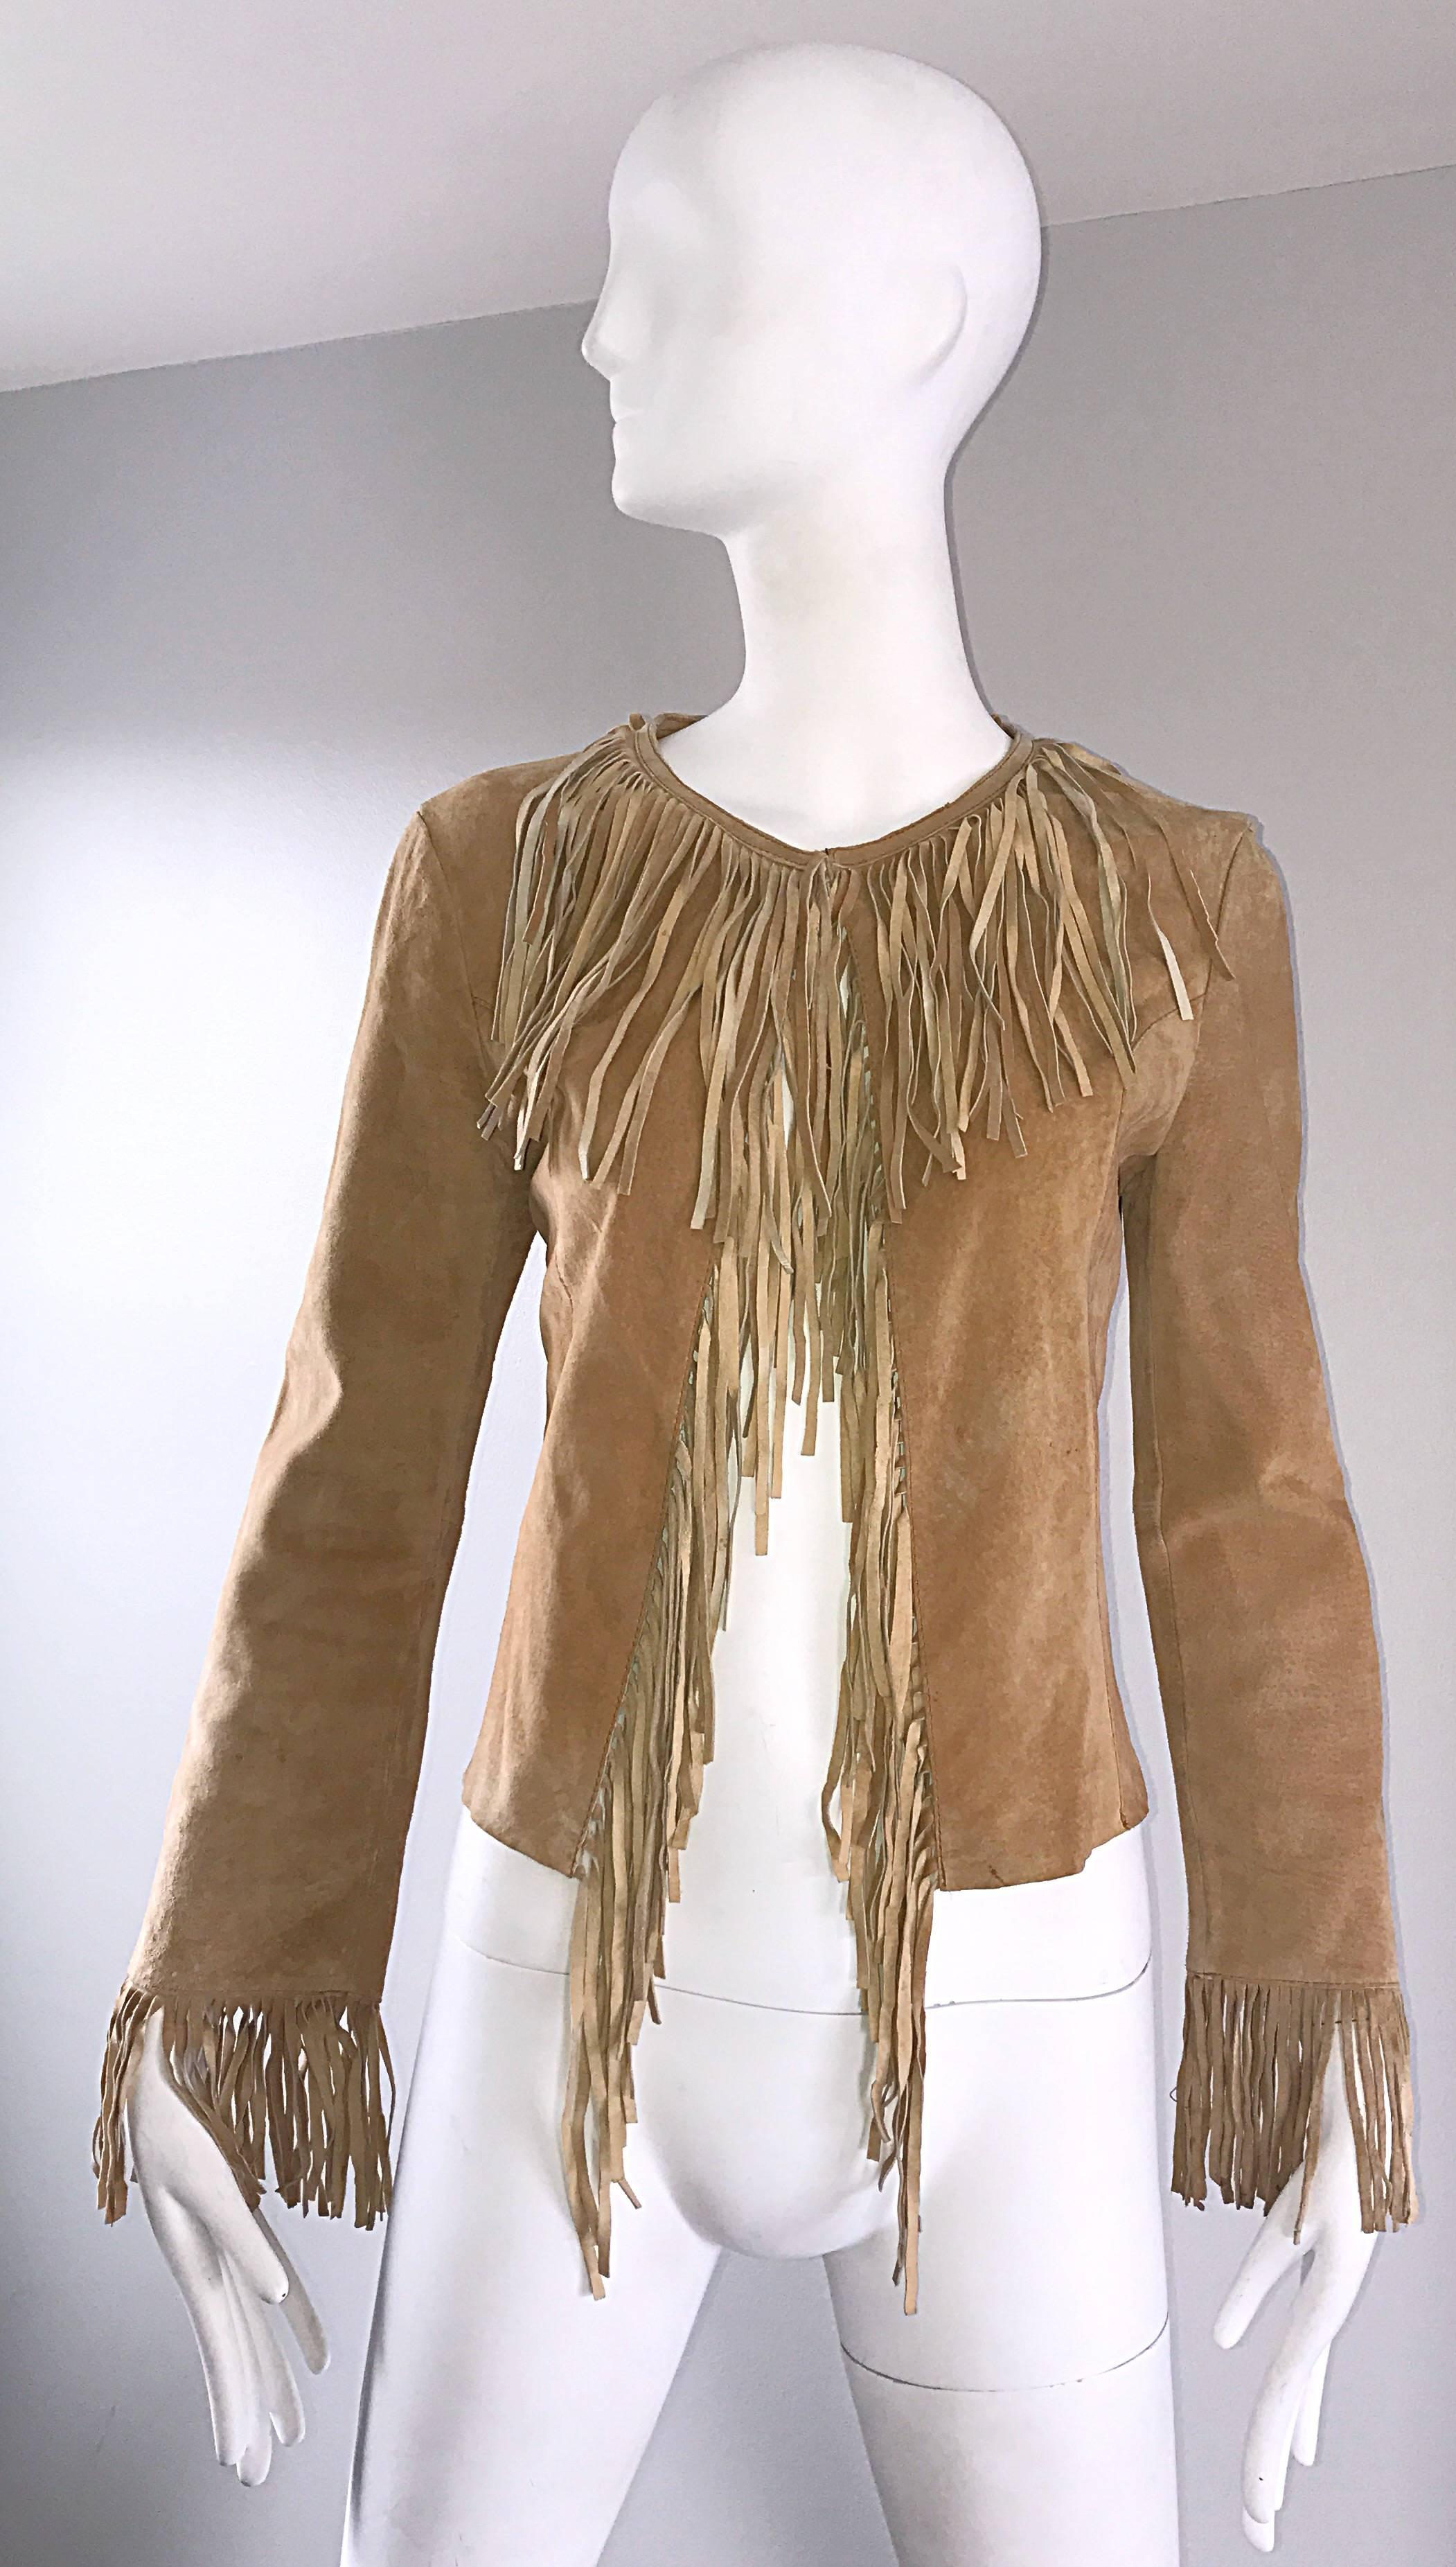 Awesome 1970s tan leather suede fringe jacket! Features fringe at the collar that leads all the way down the front center, and fringe at each sleeve cuff. Looks amazing on (there is so much movement!). Single hook-and-eye closure at top neck. Such a